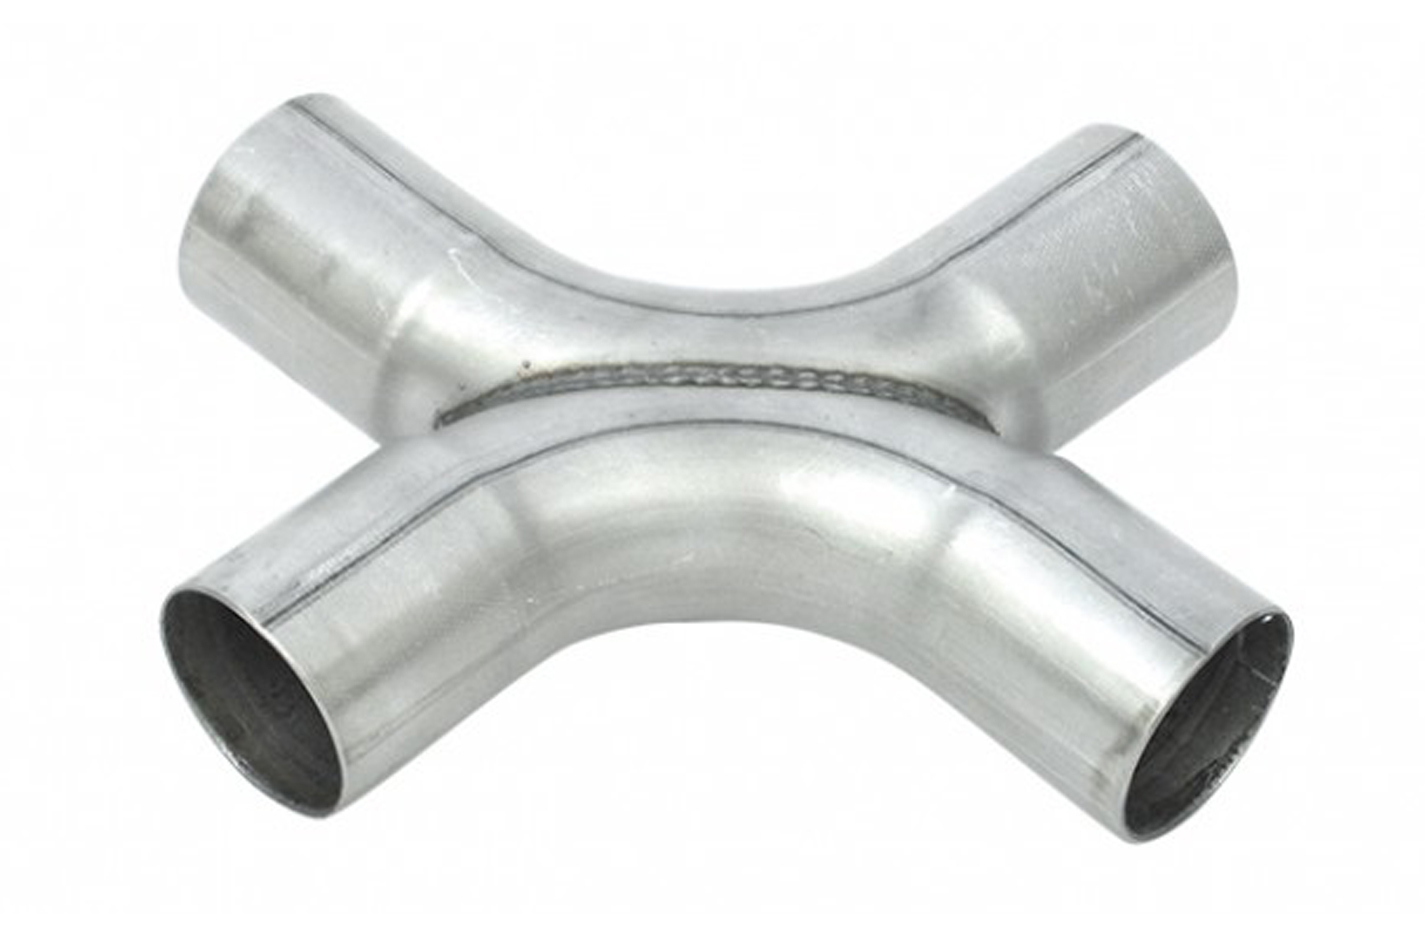 Dynomax 88327 Exhaust X-Pipe, 2-1/2 in Inlets, 2-1/2 in Outlets, Steel, Aluminized, Universal, Each